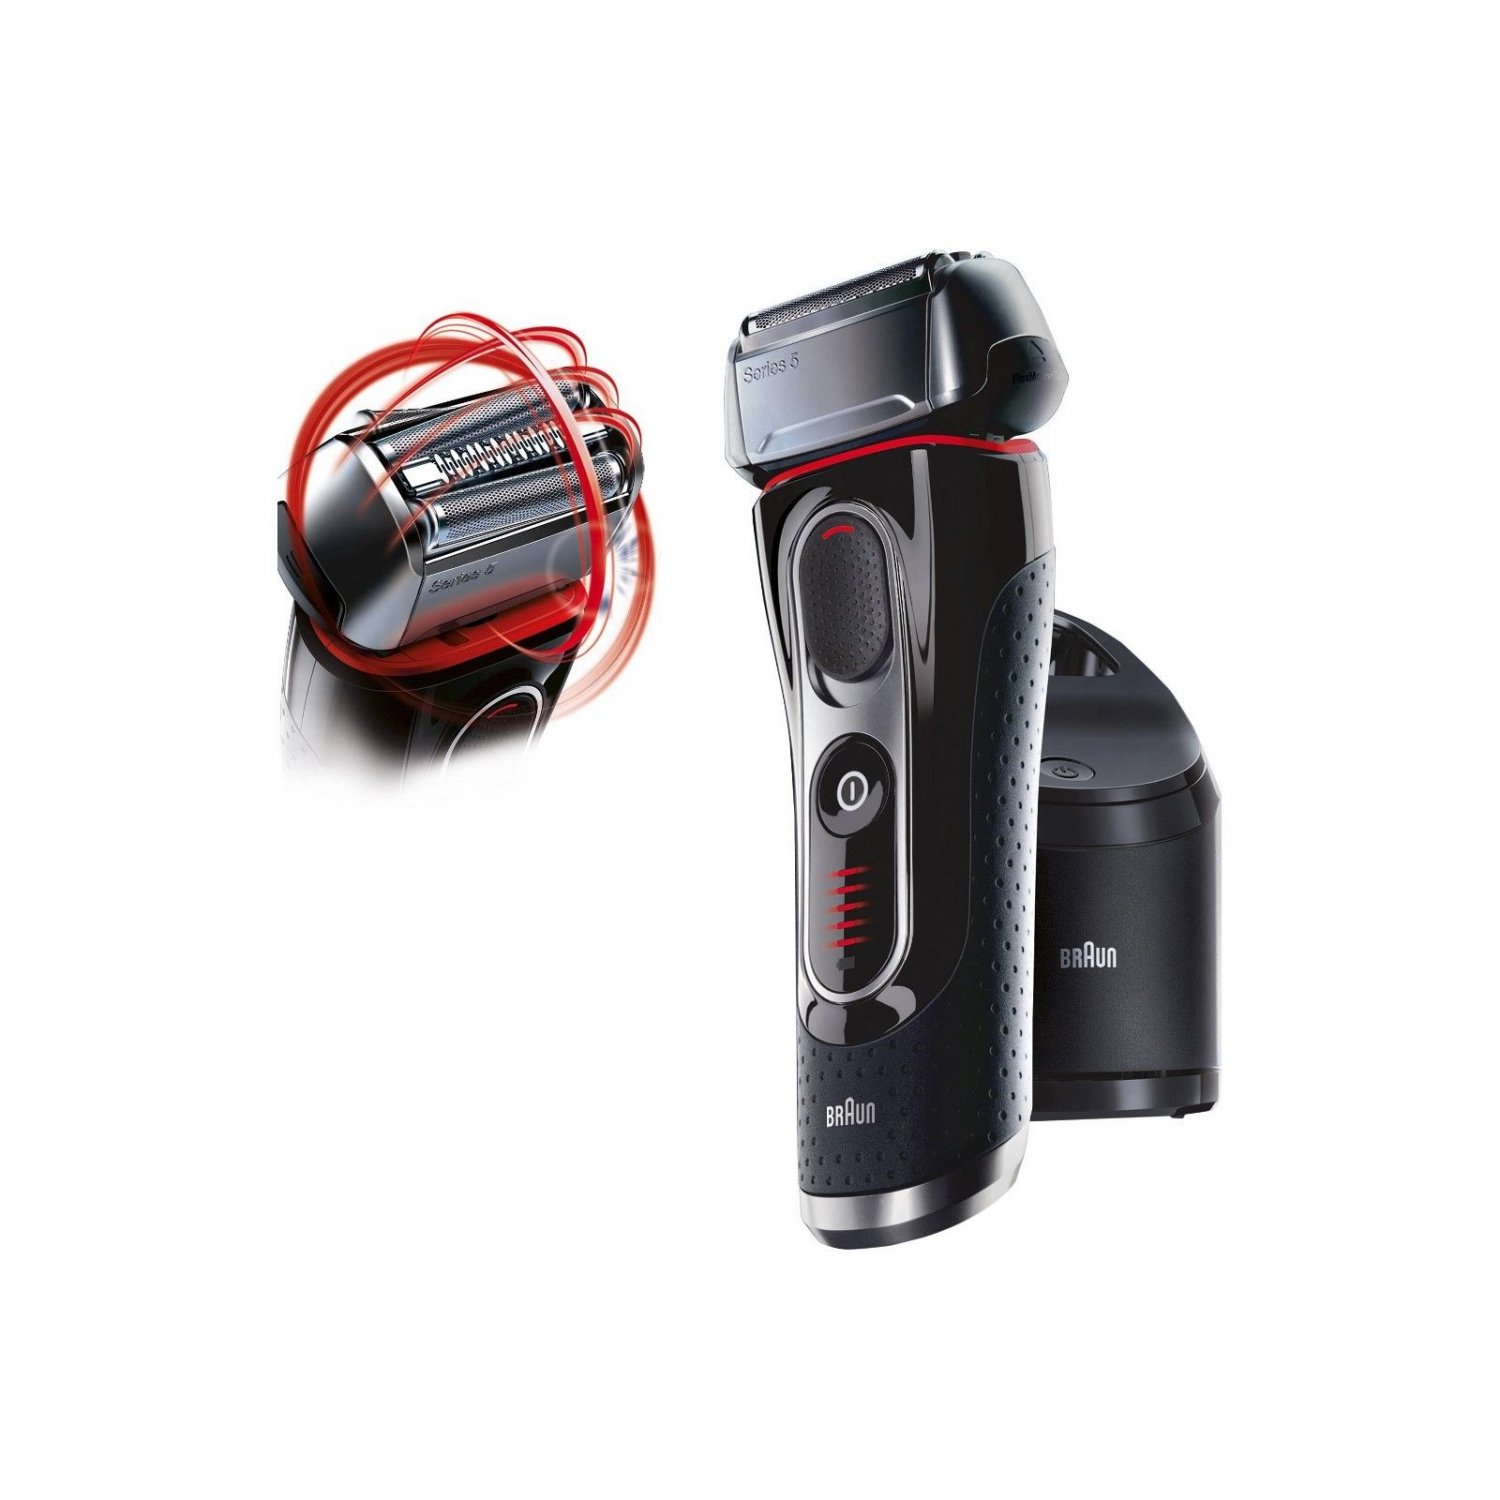 Braun Series 5 5090cc Electric Shaver with Cleaning Center BRAND NEW